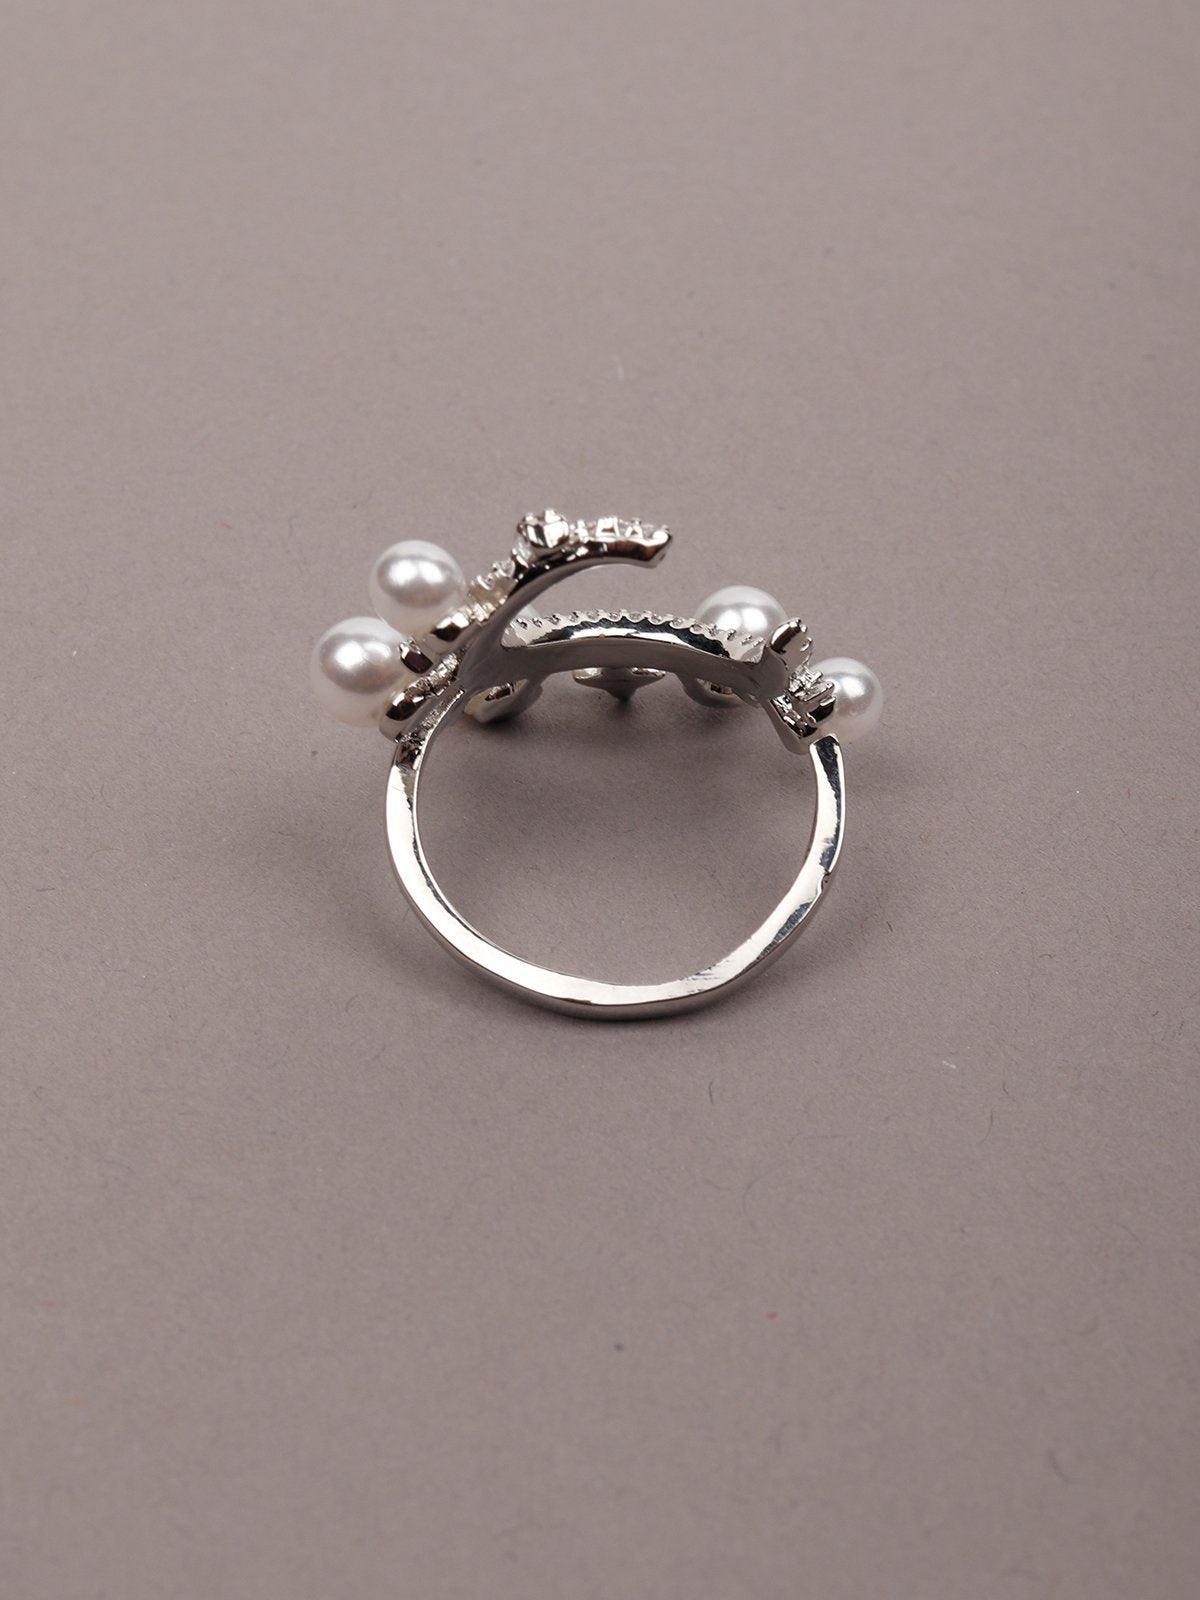 Women's Silver Tone Pearls & Crystal Ring - Odette